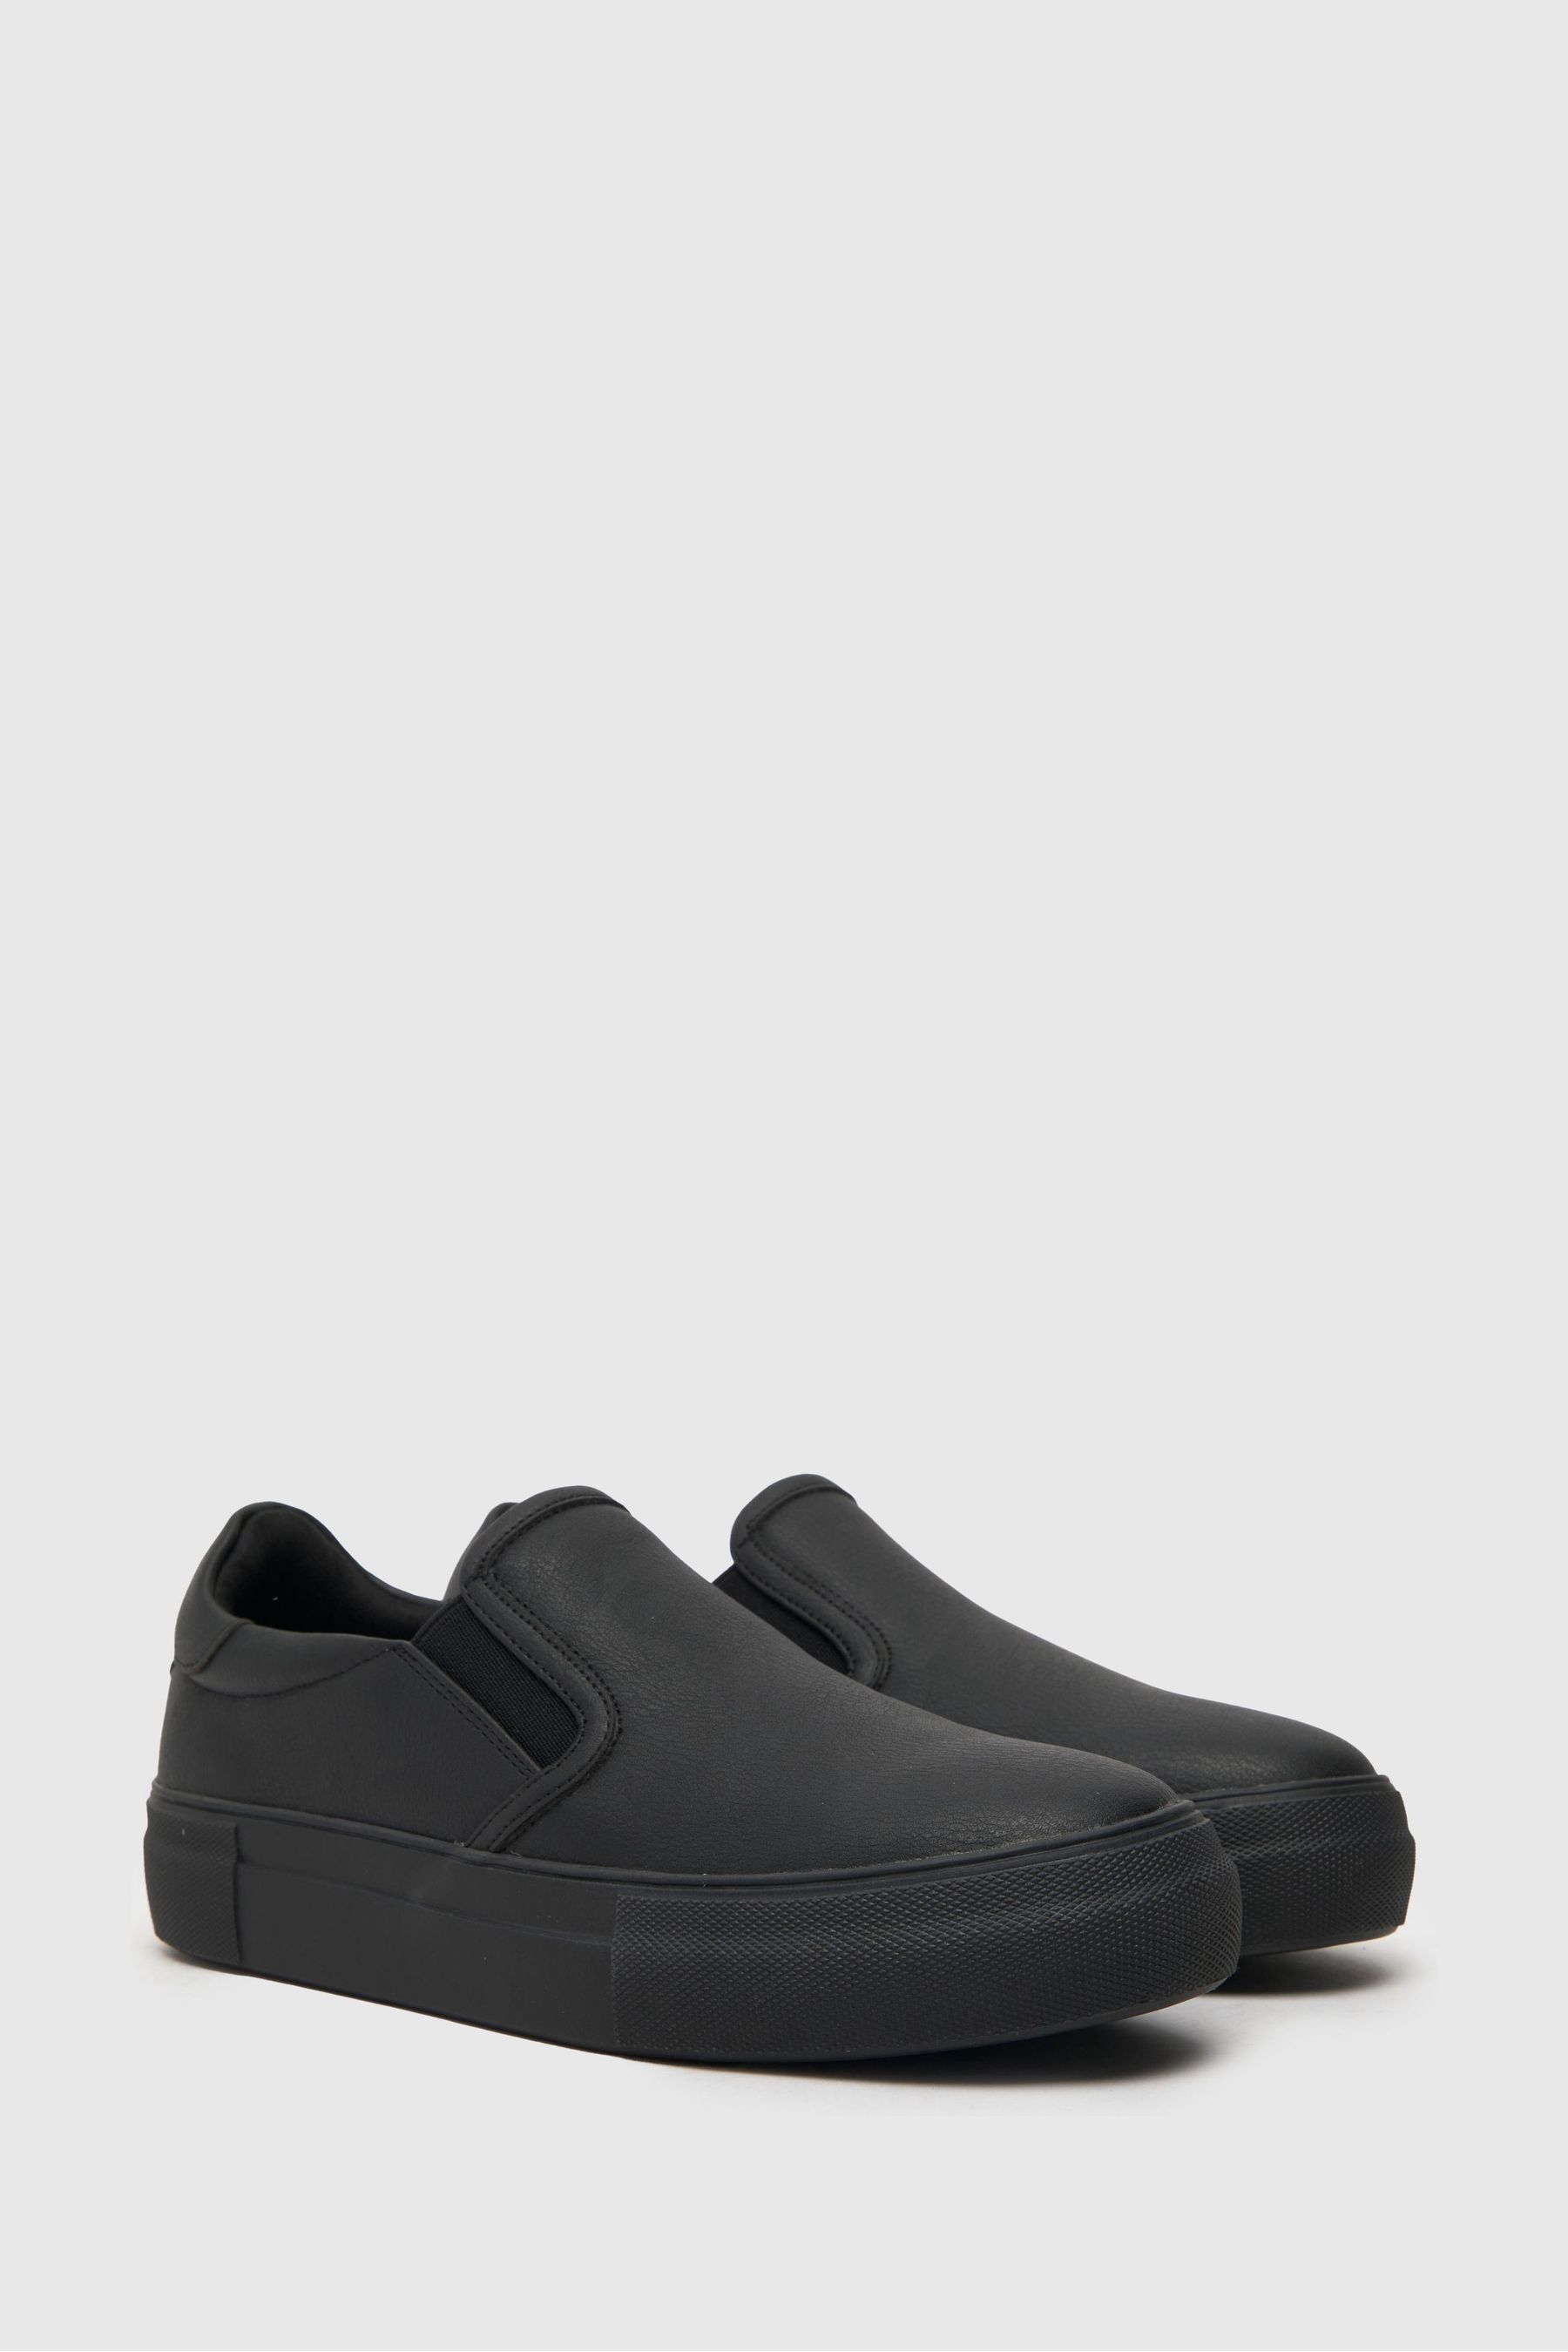 Buy Schuh Noah Slip On Trainers from the Next UK online shop